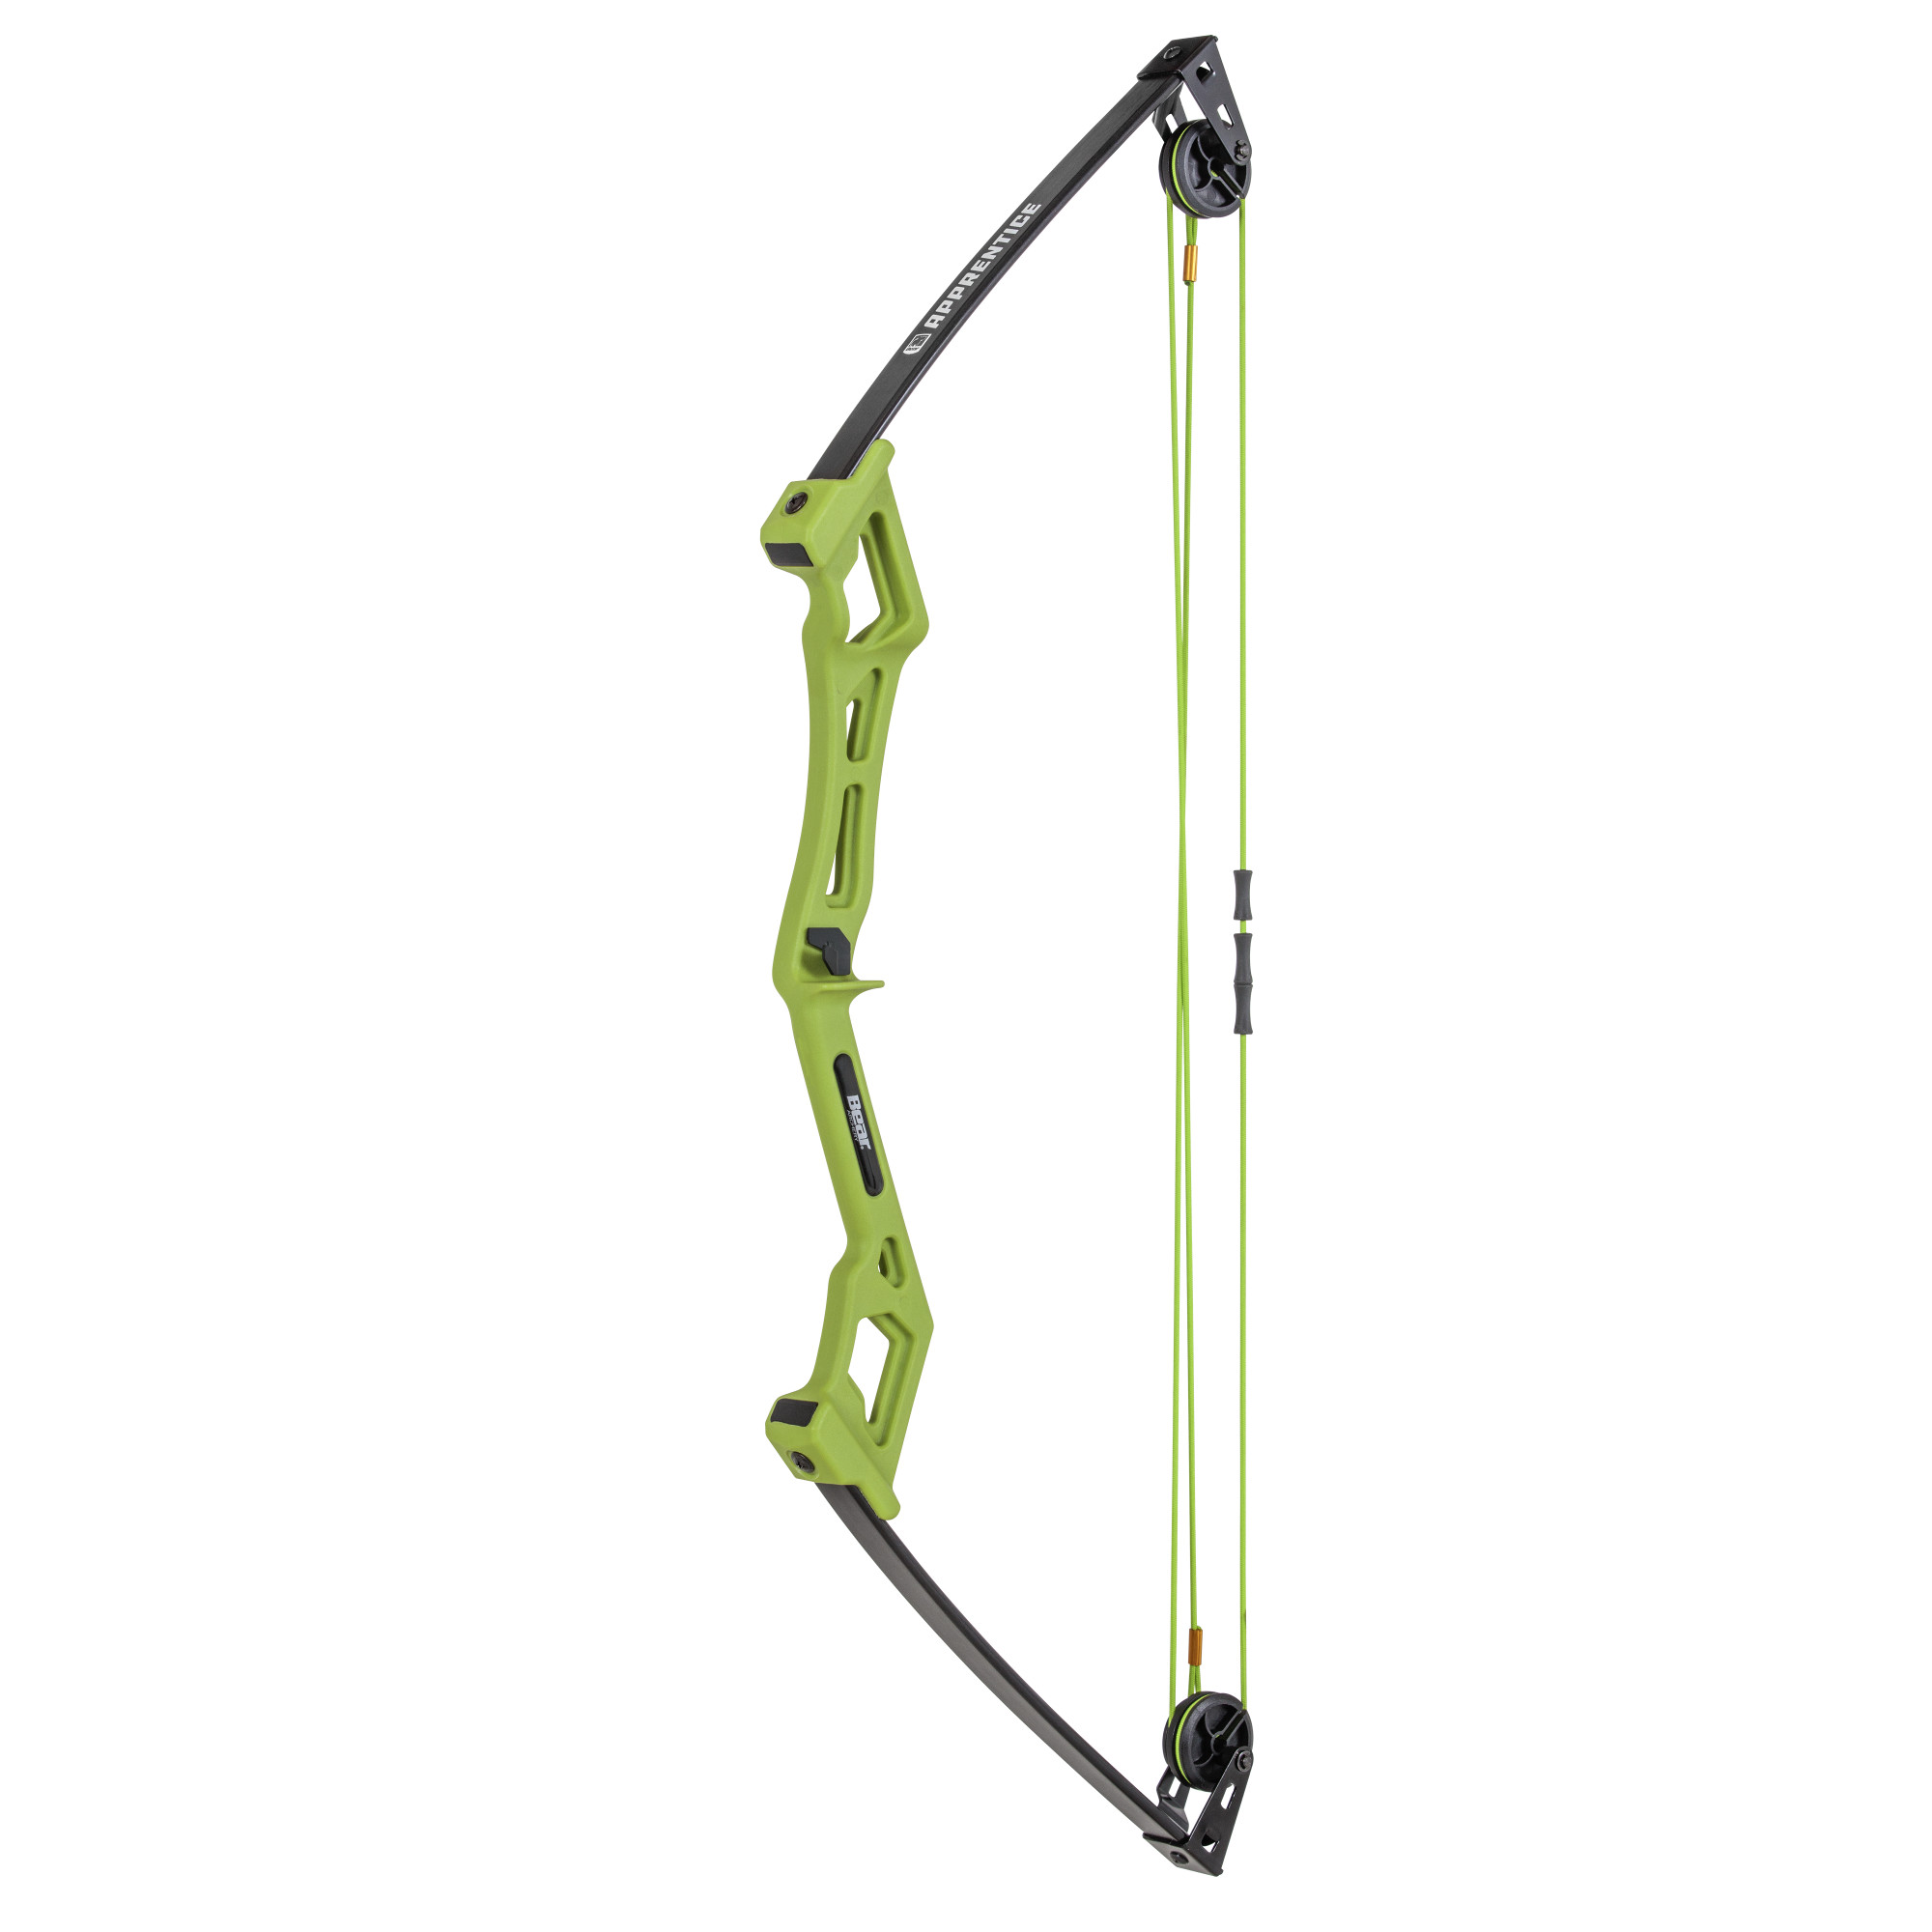 Bear Archery Apprentice Youth Bow Set Featuring 6-13.5 lb. Draw Weight and 13- to 24-inch Draw Length Range and 27” Axle-to-Axle Right-Handed Bow with Composite Limbs - image 1 of 10